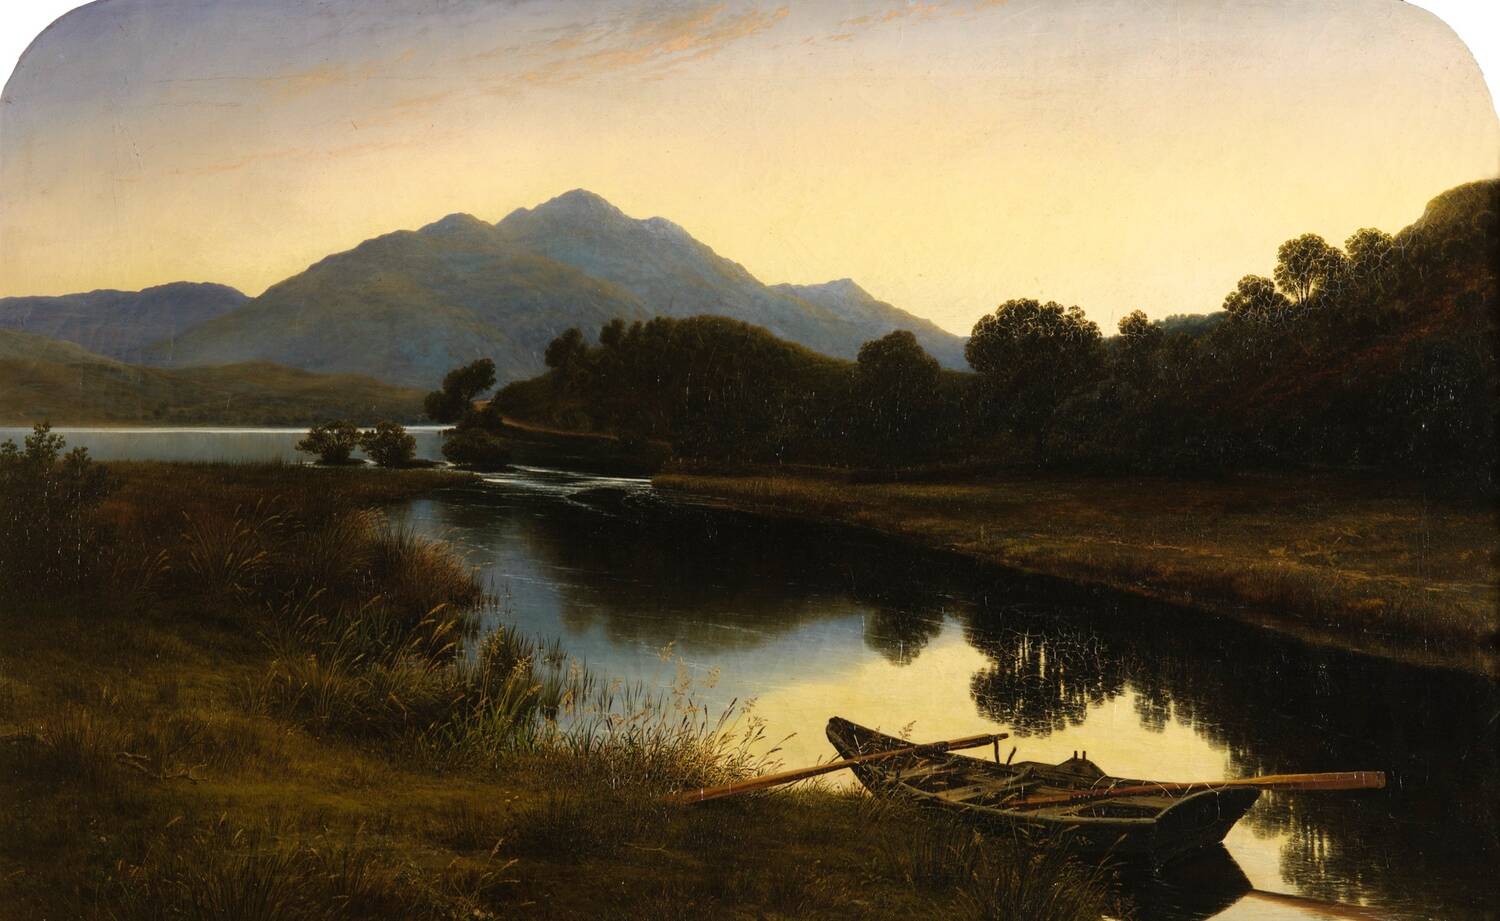 An oil painting of a rowing boat moored at the side of a loch. It is sunset. There are mountains on the far side of the loch. Reeds and long grass grow along the banks.